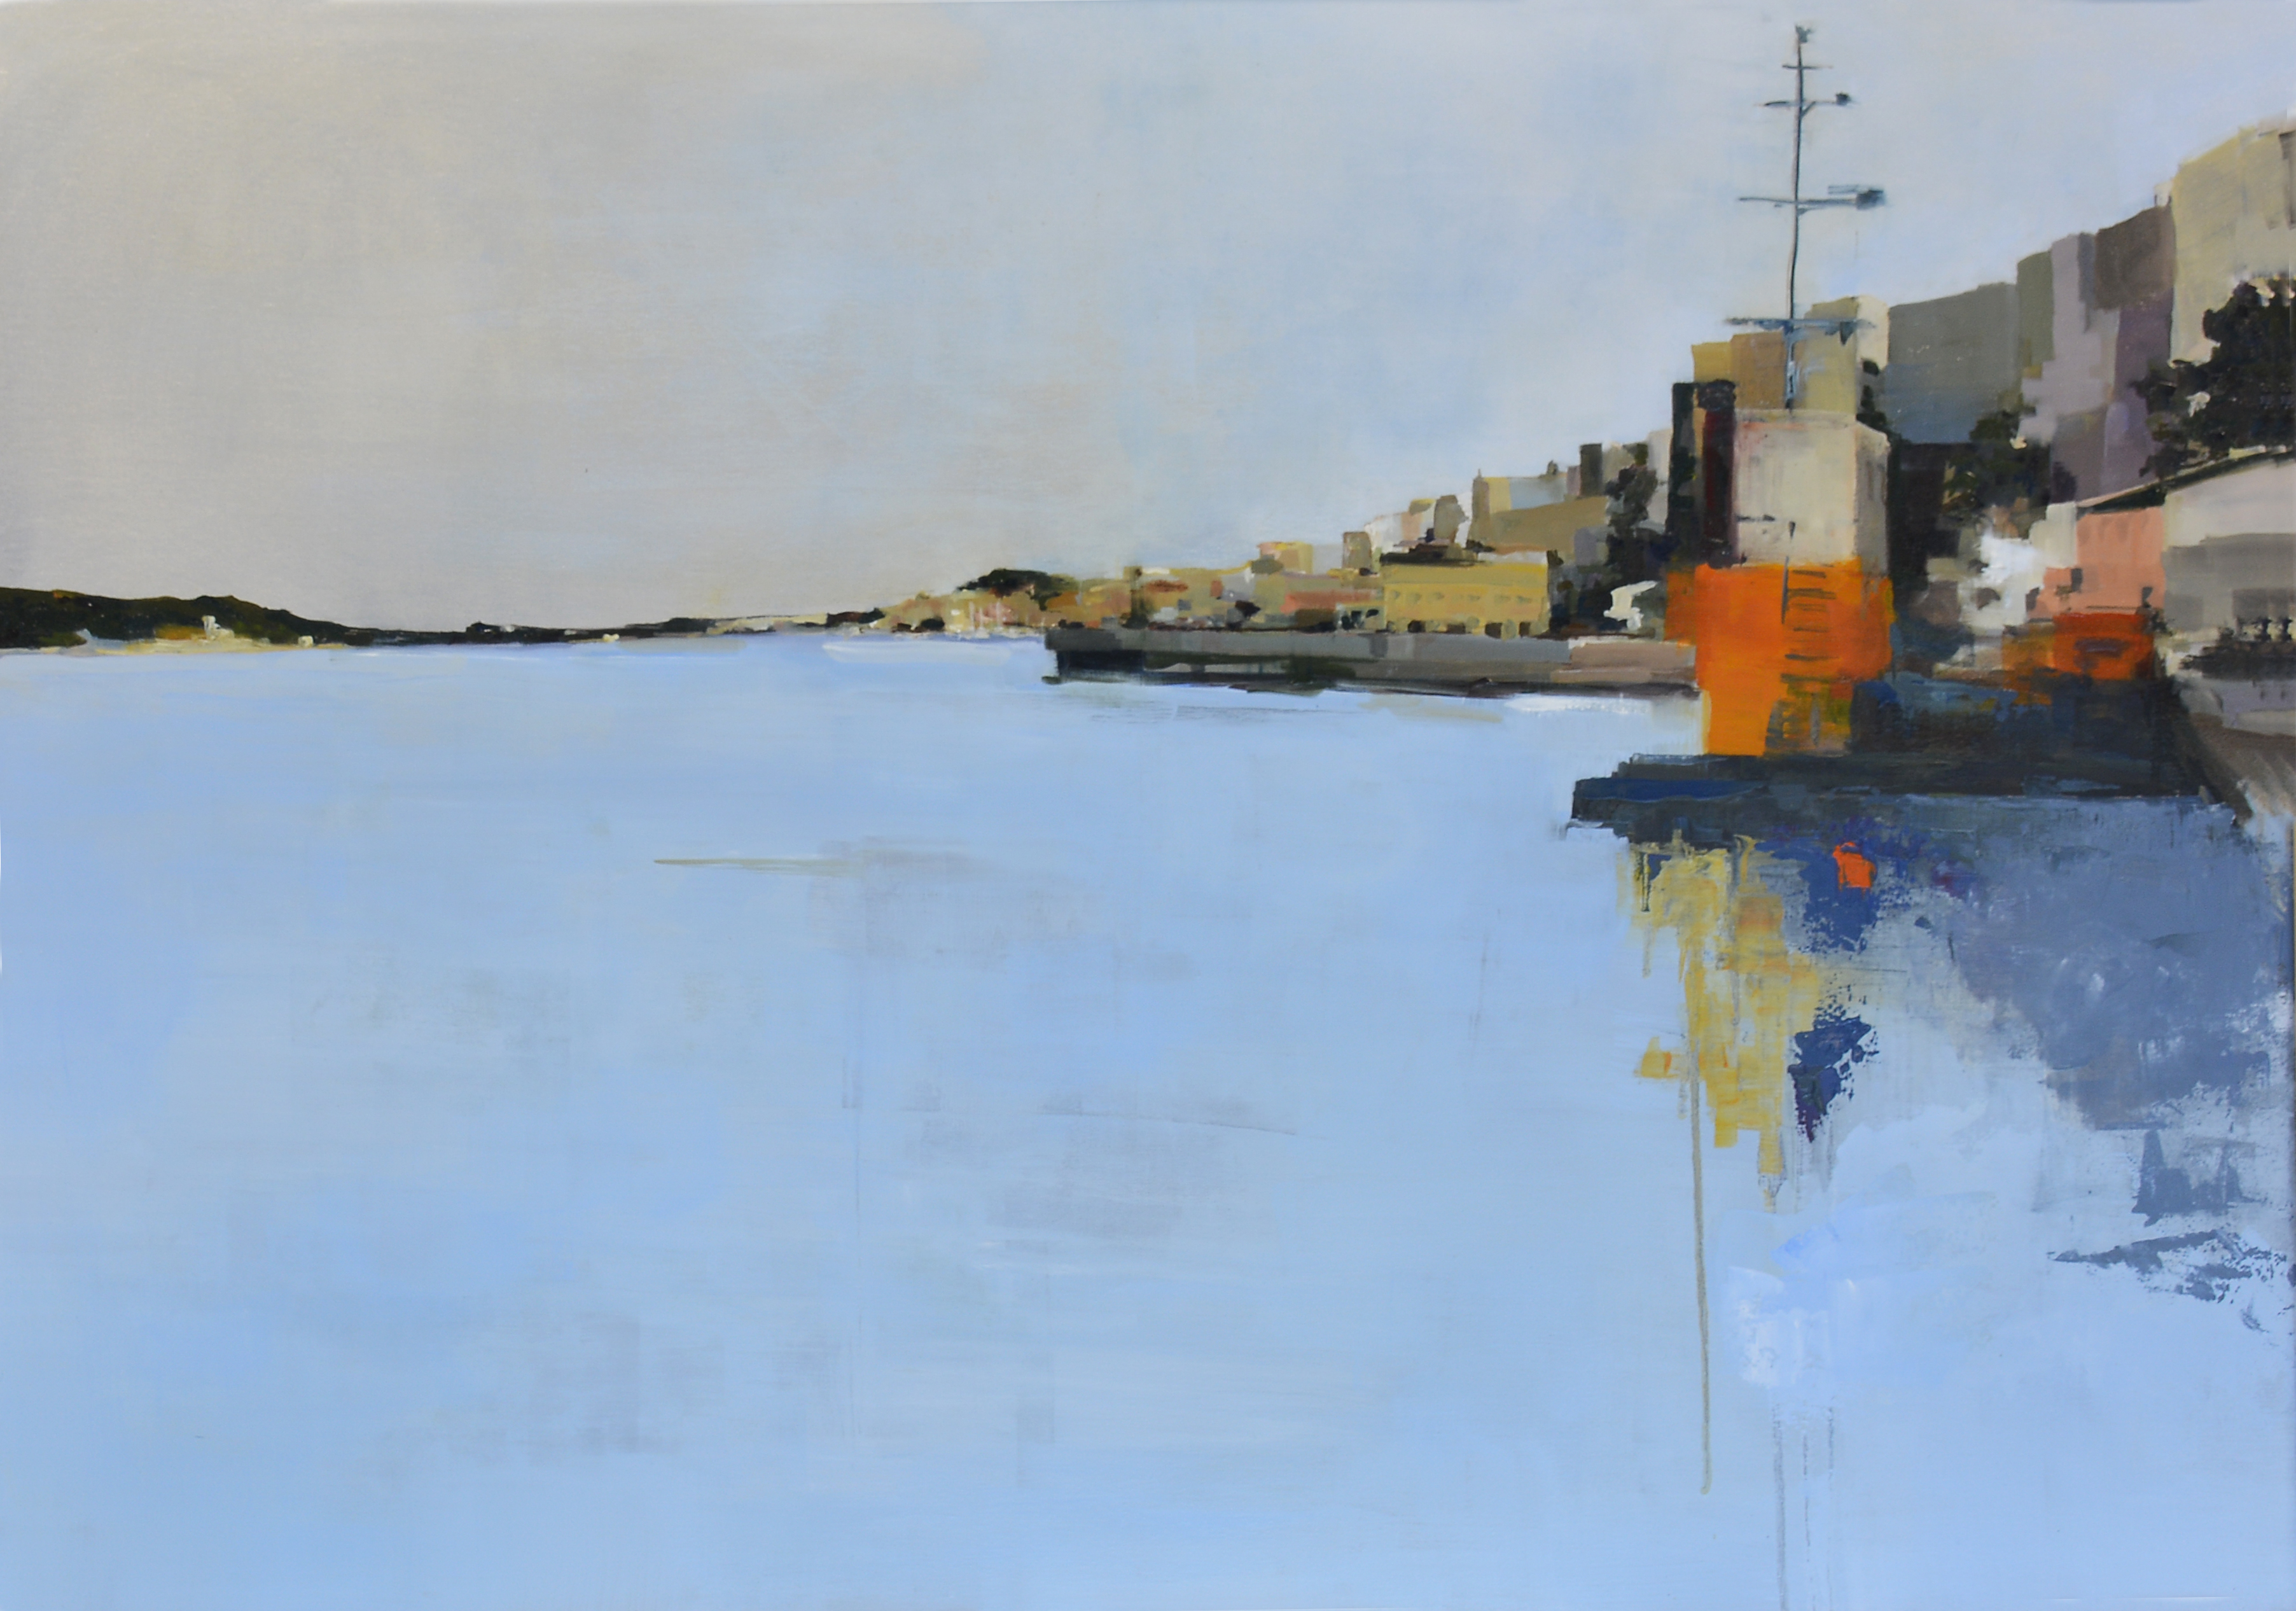 The APB exhibits the works of the 7th Painting and Photography Contest on lighthouses and ports in Mahon 